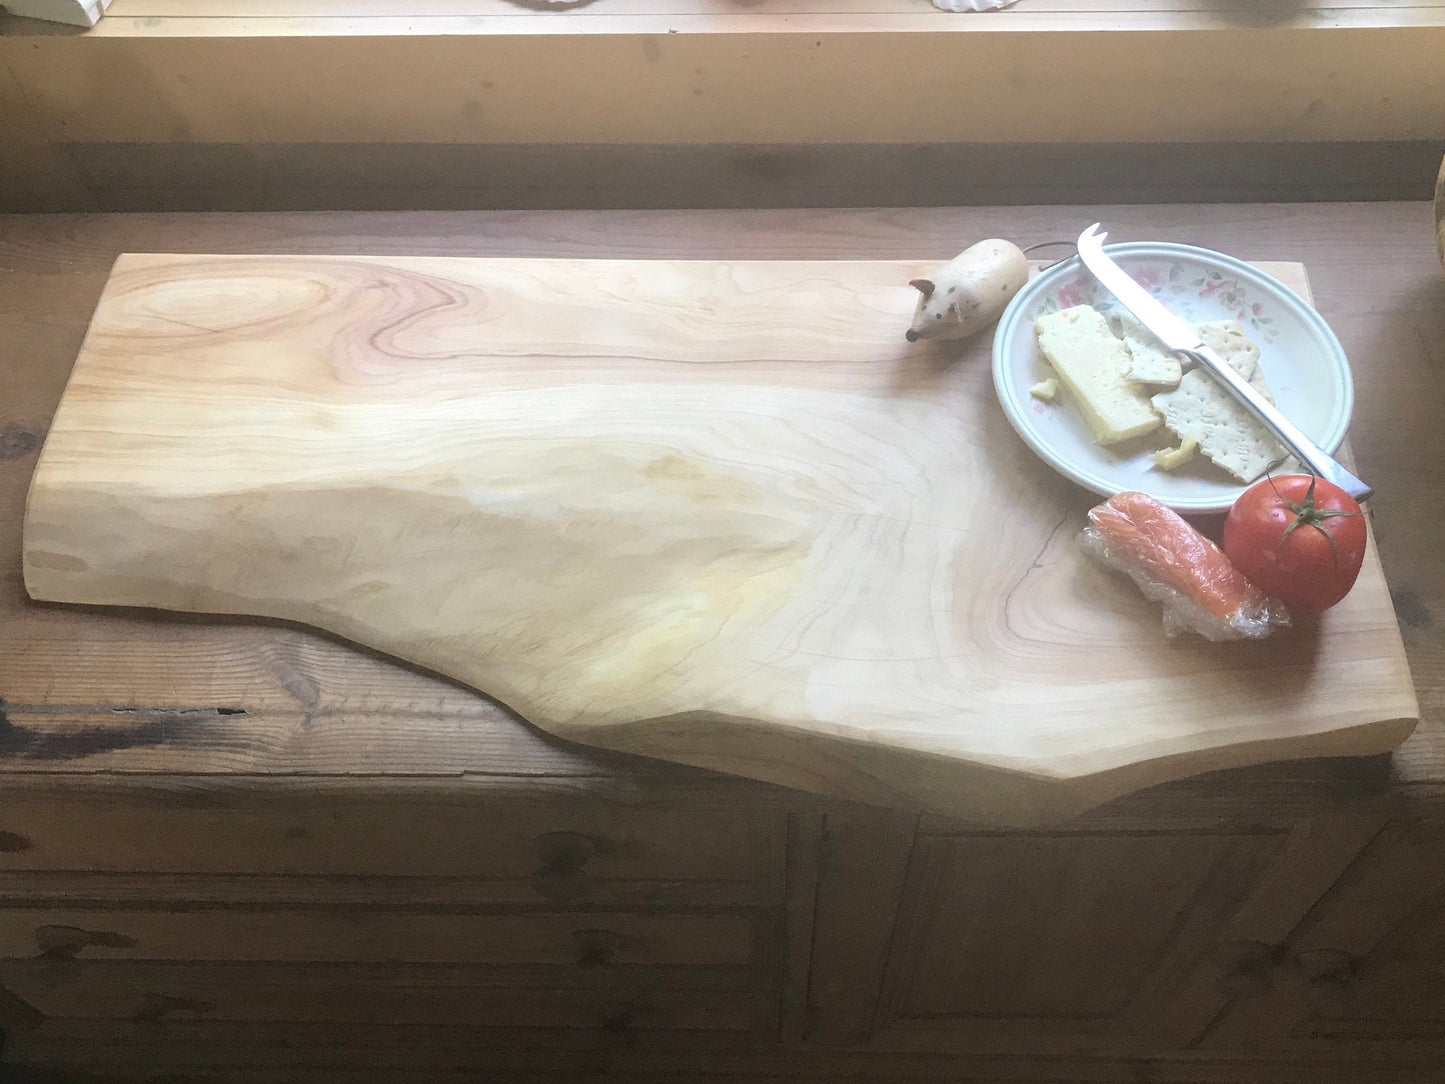 Live Edge Chopping Board, Solid Sycamore Serving Board, charcuterie board/platter James Martin style